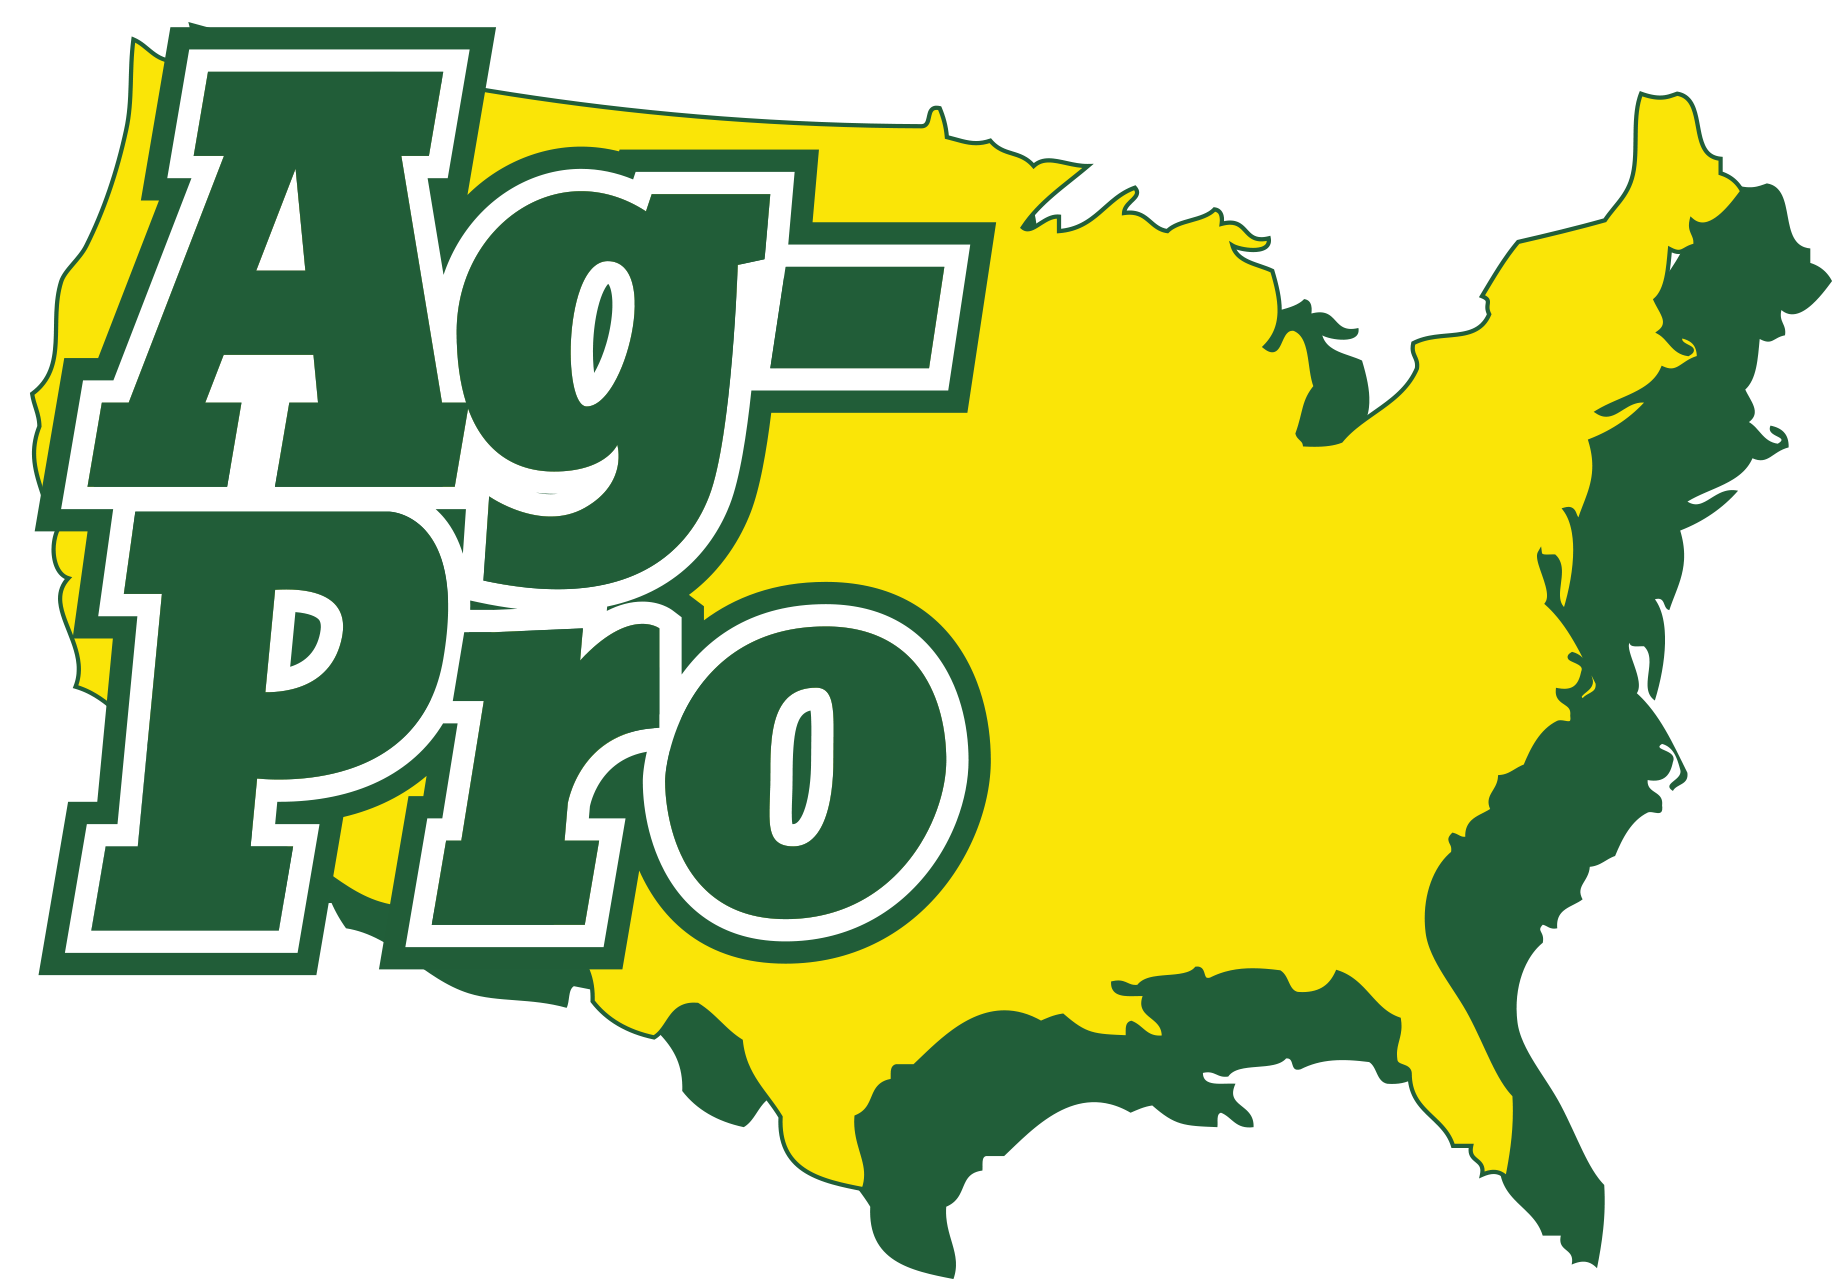 Ag-Pro Expansion to 55 Locations Includes Neuhaus & Company and